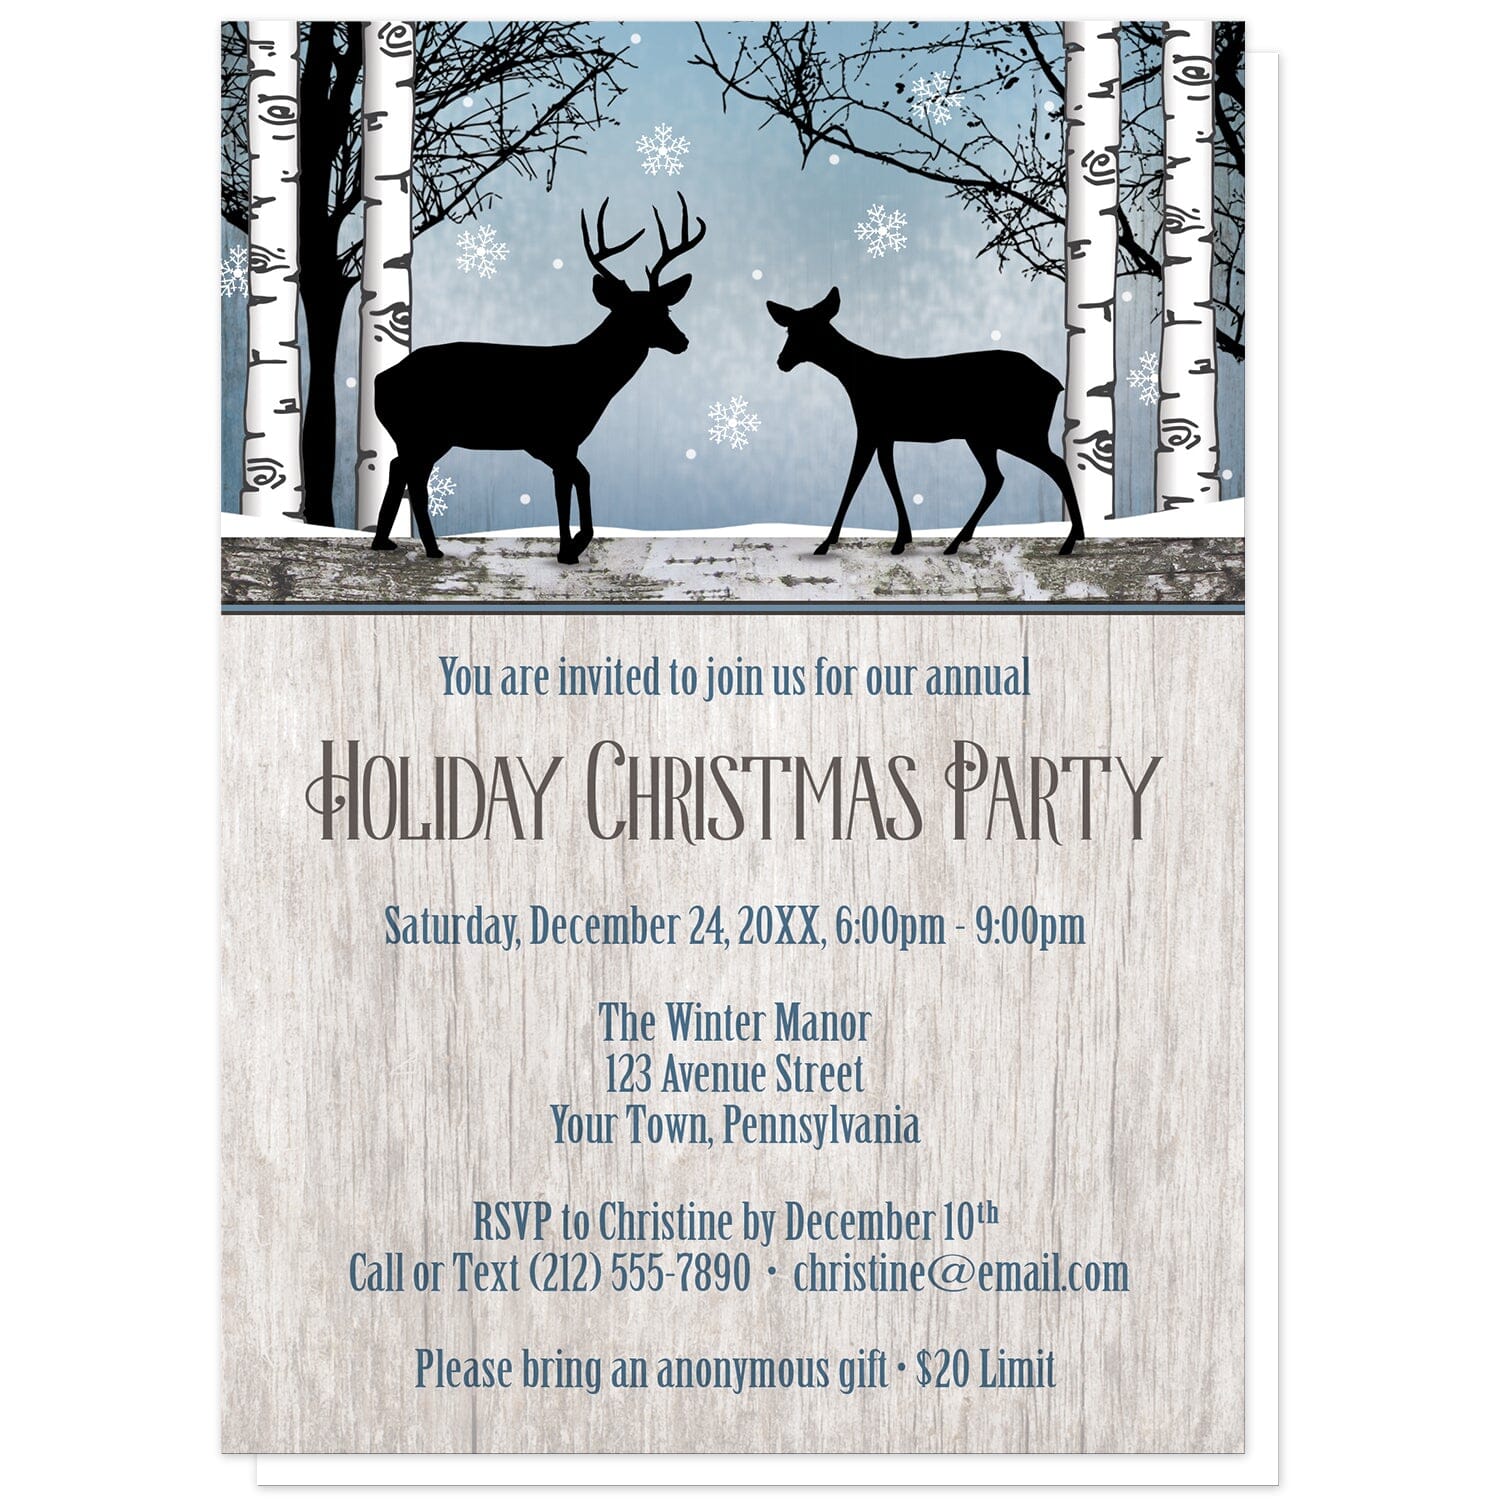 Rustic Blue Winter Deer Christmas Party Invitations at Artistically Invited. Rustic blue winter deer Christmas party invitations with two silhouettes of deer surrounded by white birch trees over a snowy blue background with snowflakes. One silhouette is of a buck deer with antlers while the other is a gentle doe, meeting in the middle. Your personalized holiday party details are custom printed in blue and brown over a light country wood background.